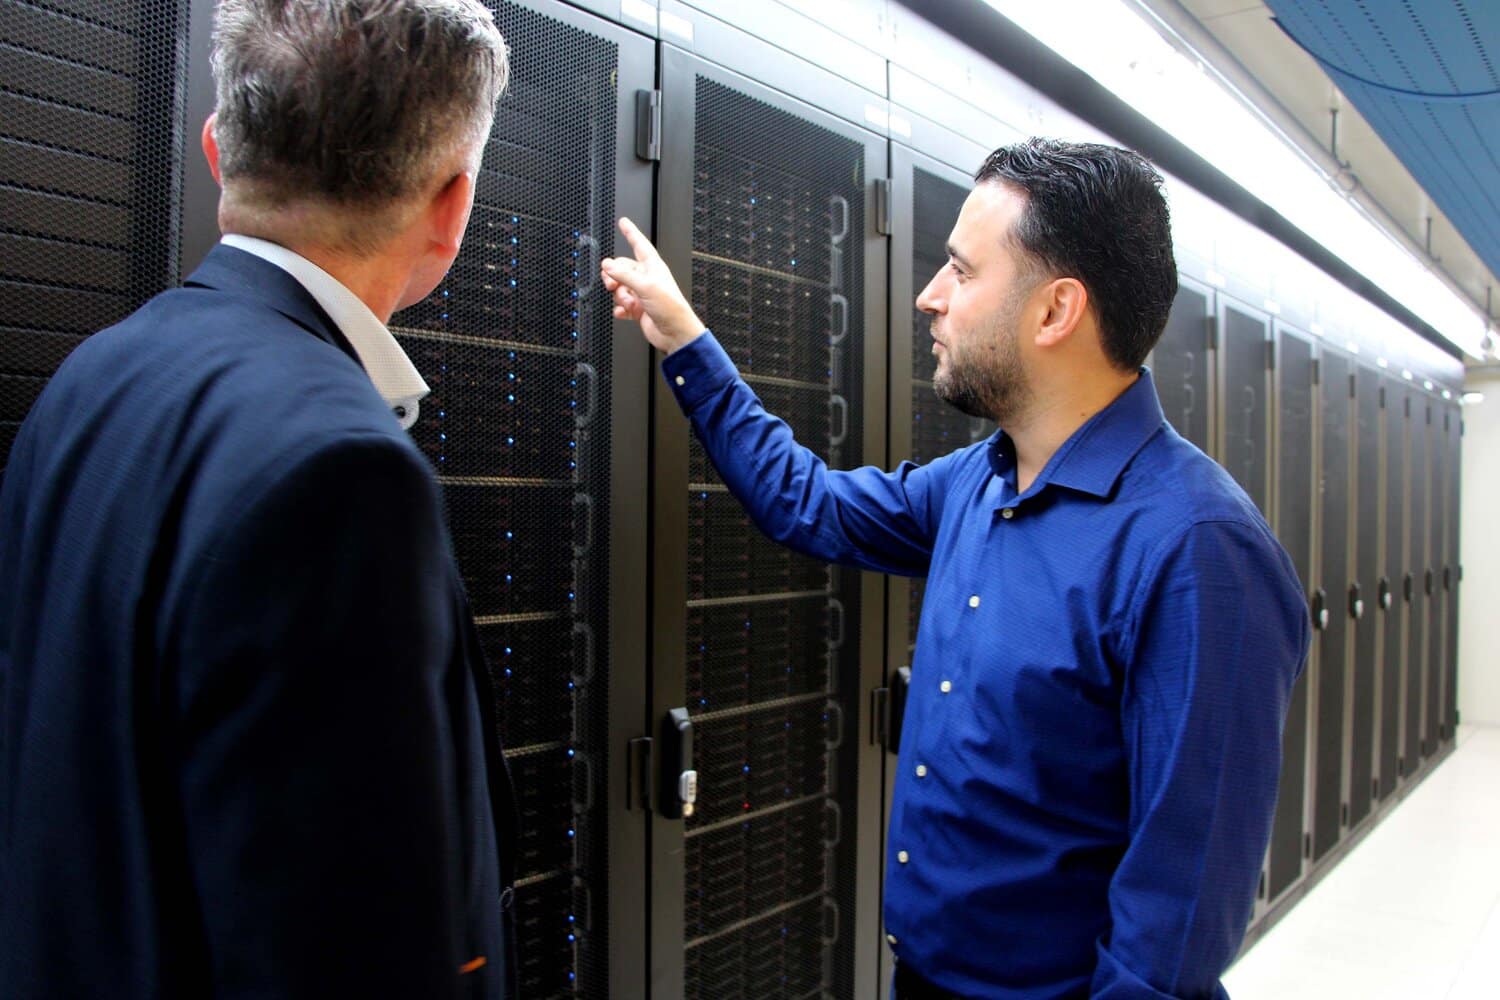 High availability and uptime are key for Snel.com customers